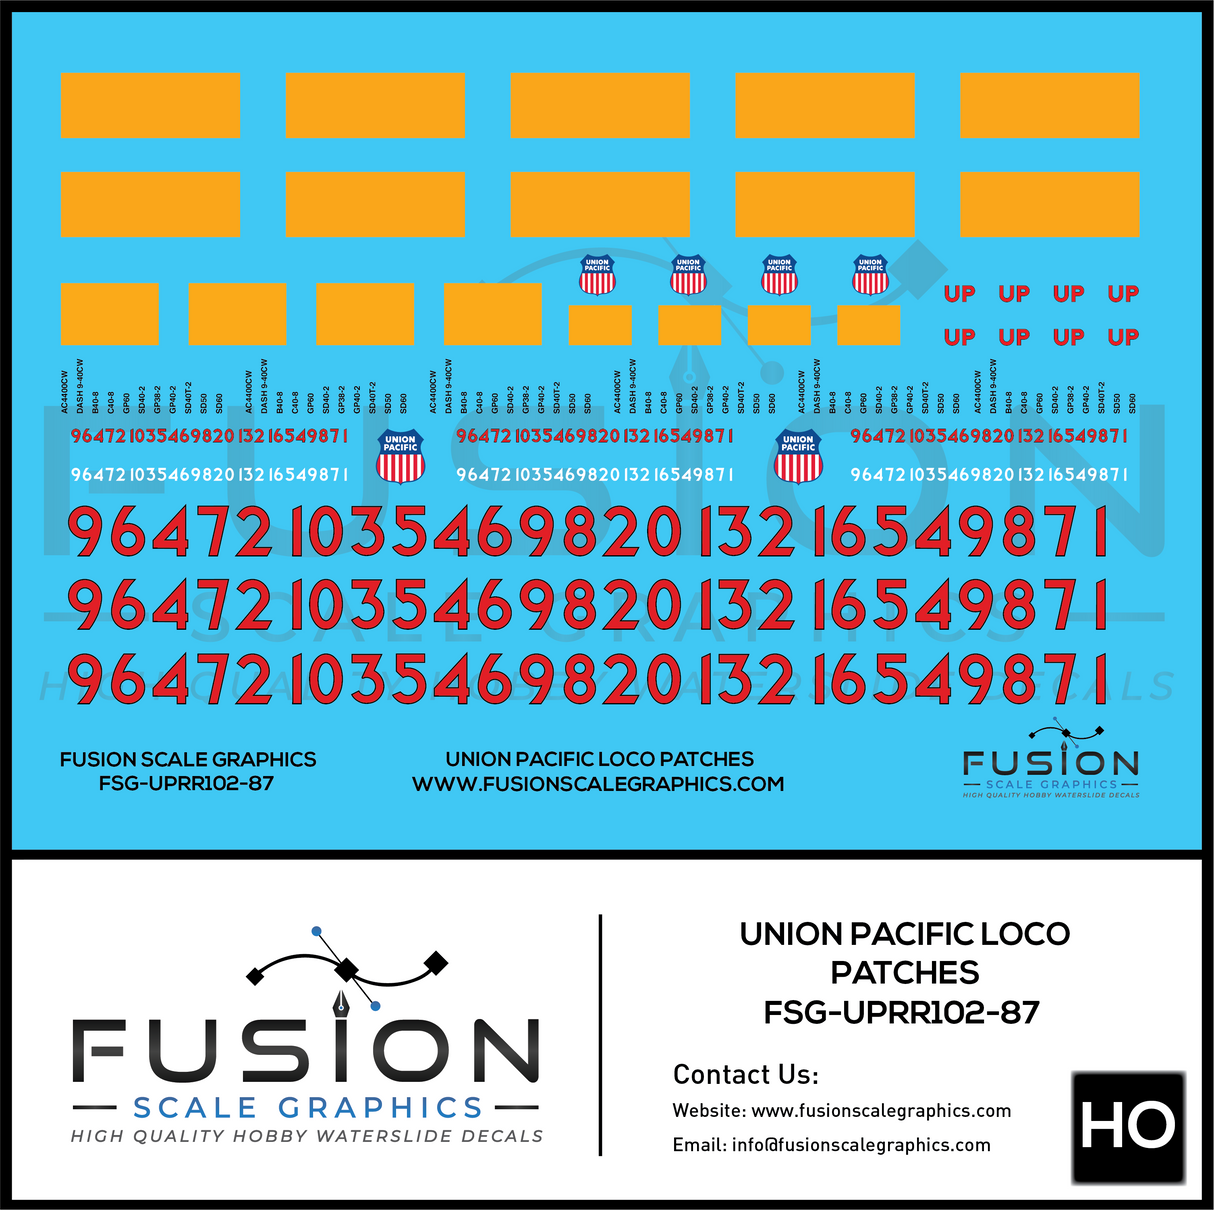 HO Scale Union Pacific Locomotive Patching Decal Set